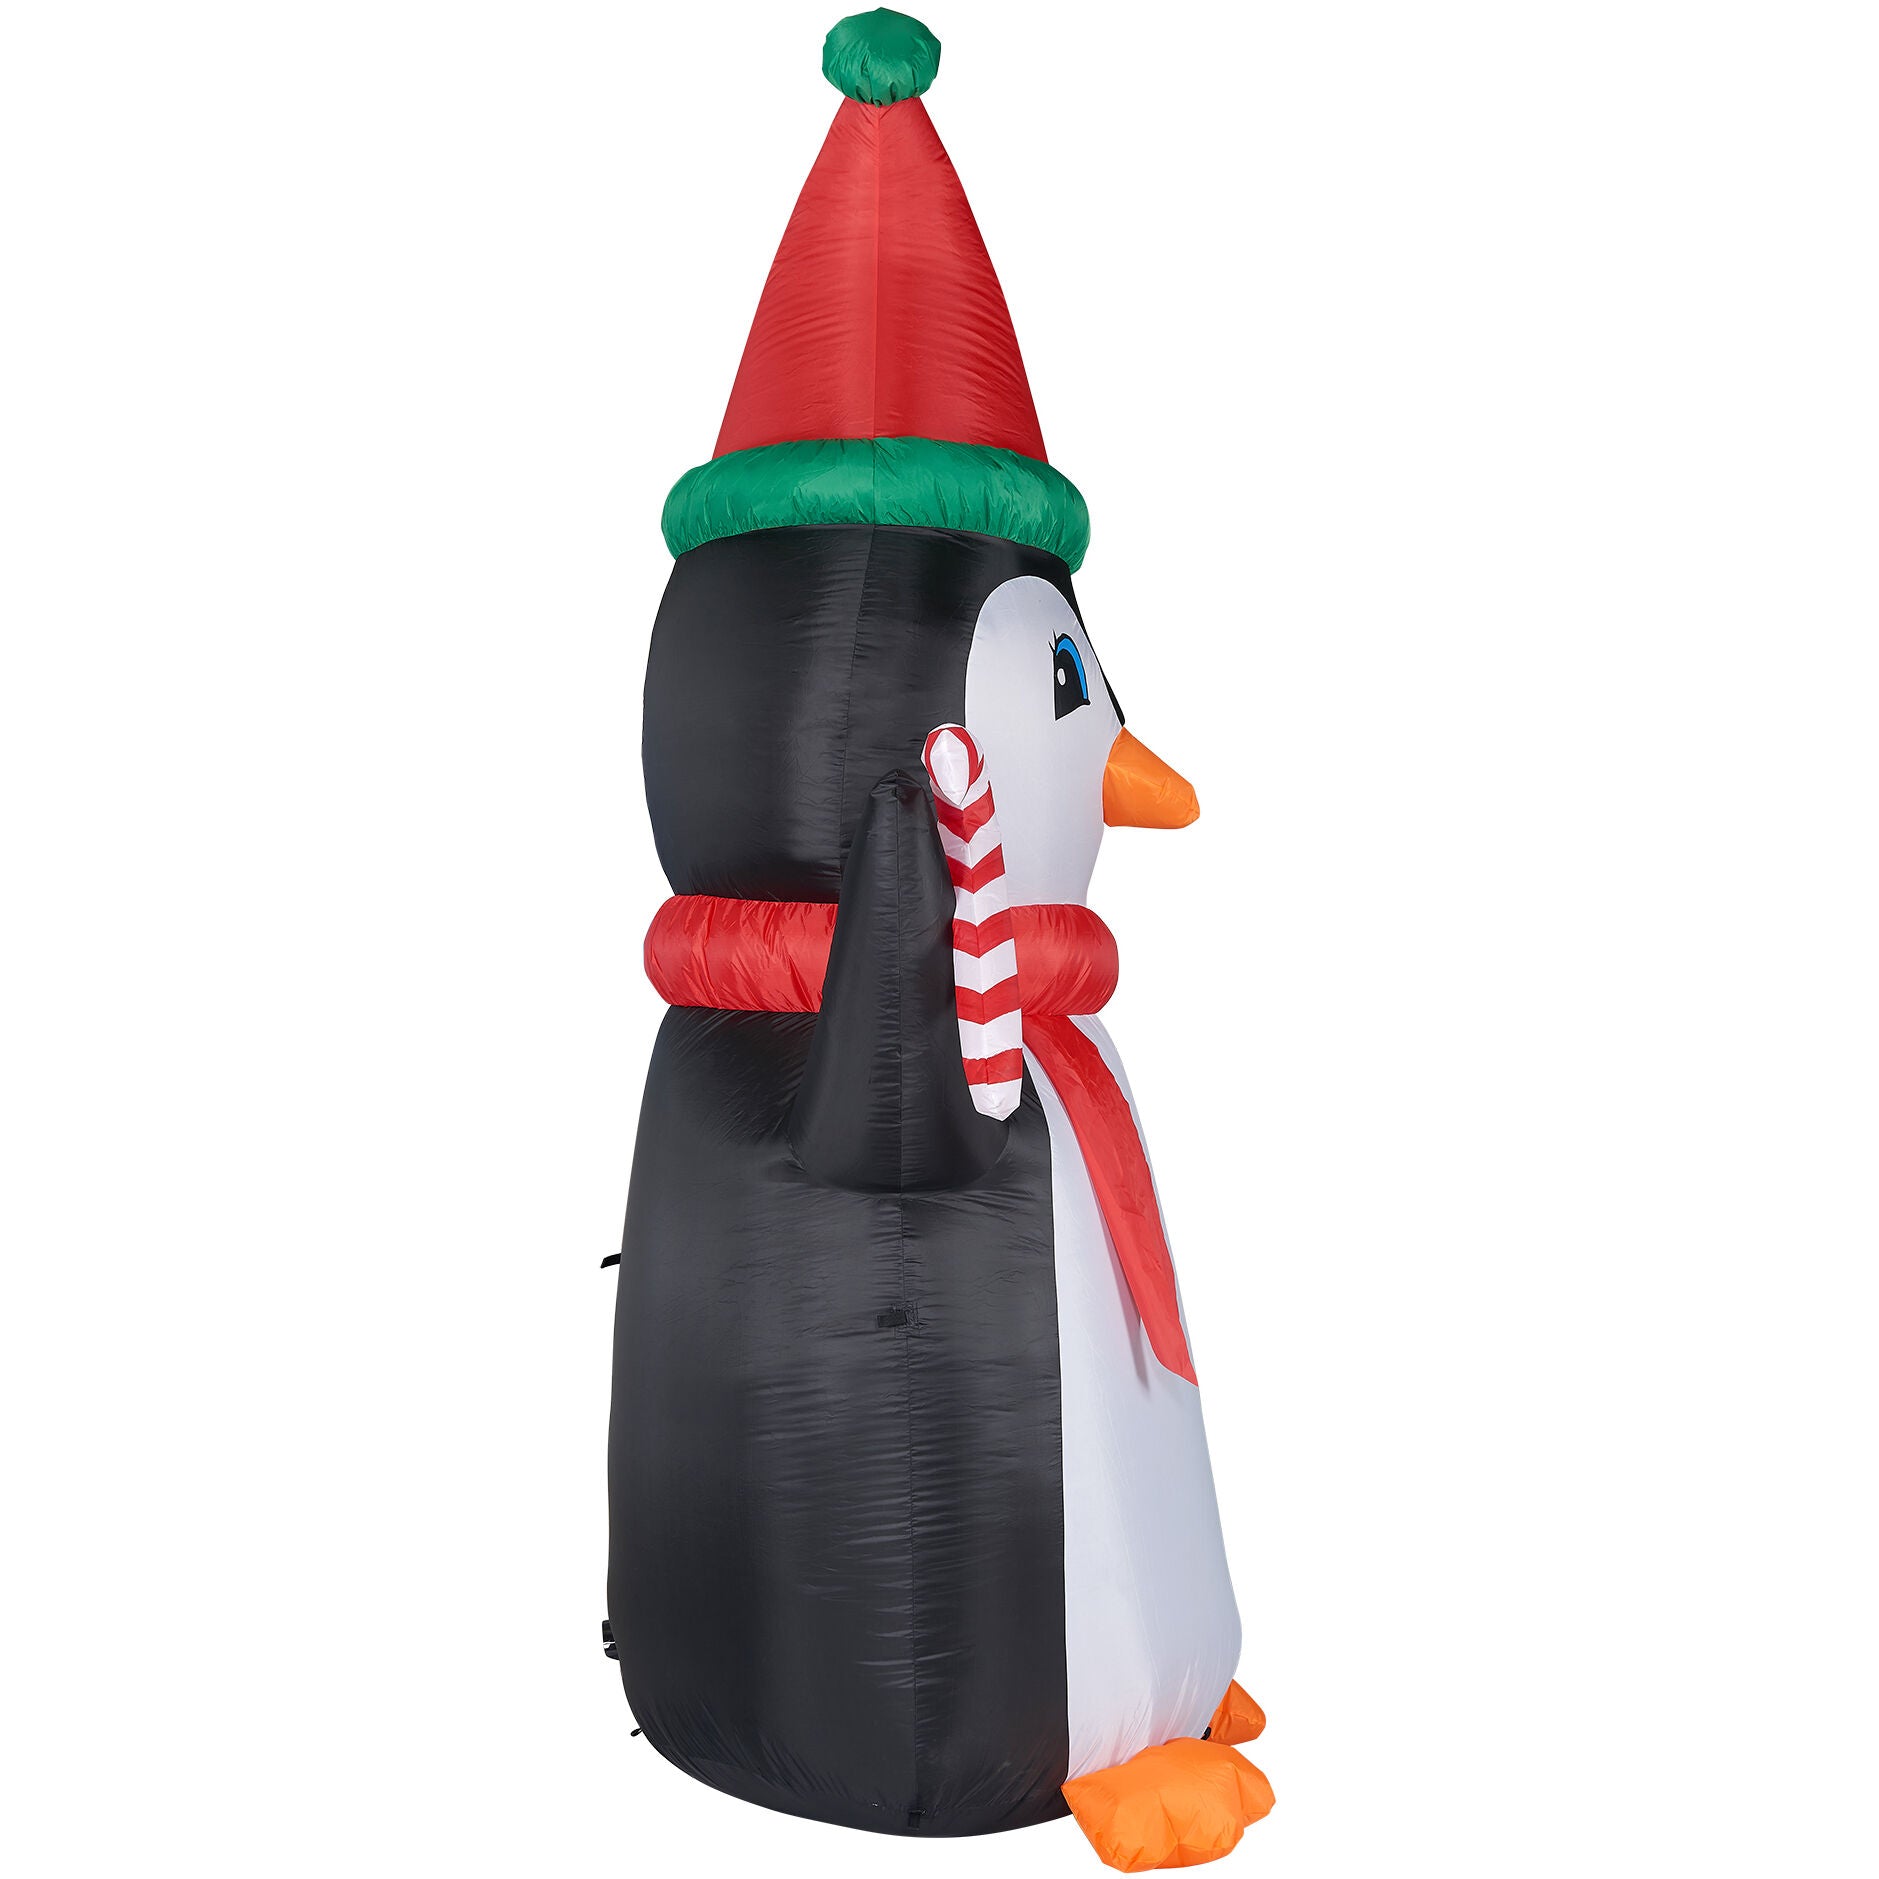 Fraser Hill Farm -  10-Ft. Tall Penguin with Candy Cane, Outdoor Blow-Up Christmas Inflatable with RGB Lights and Storage Bag